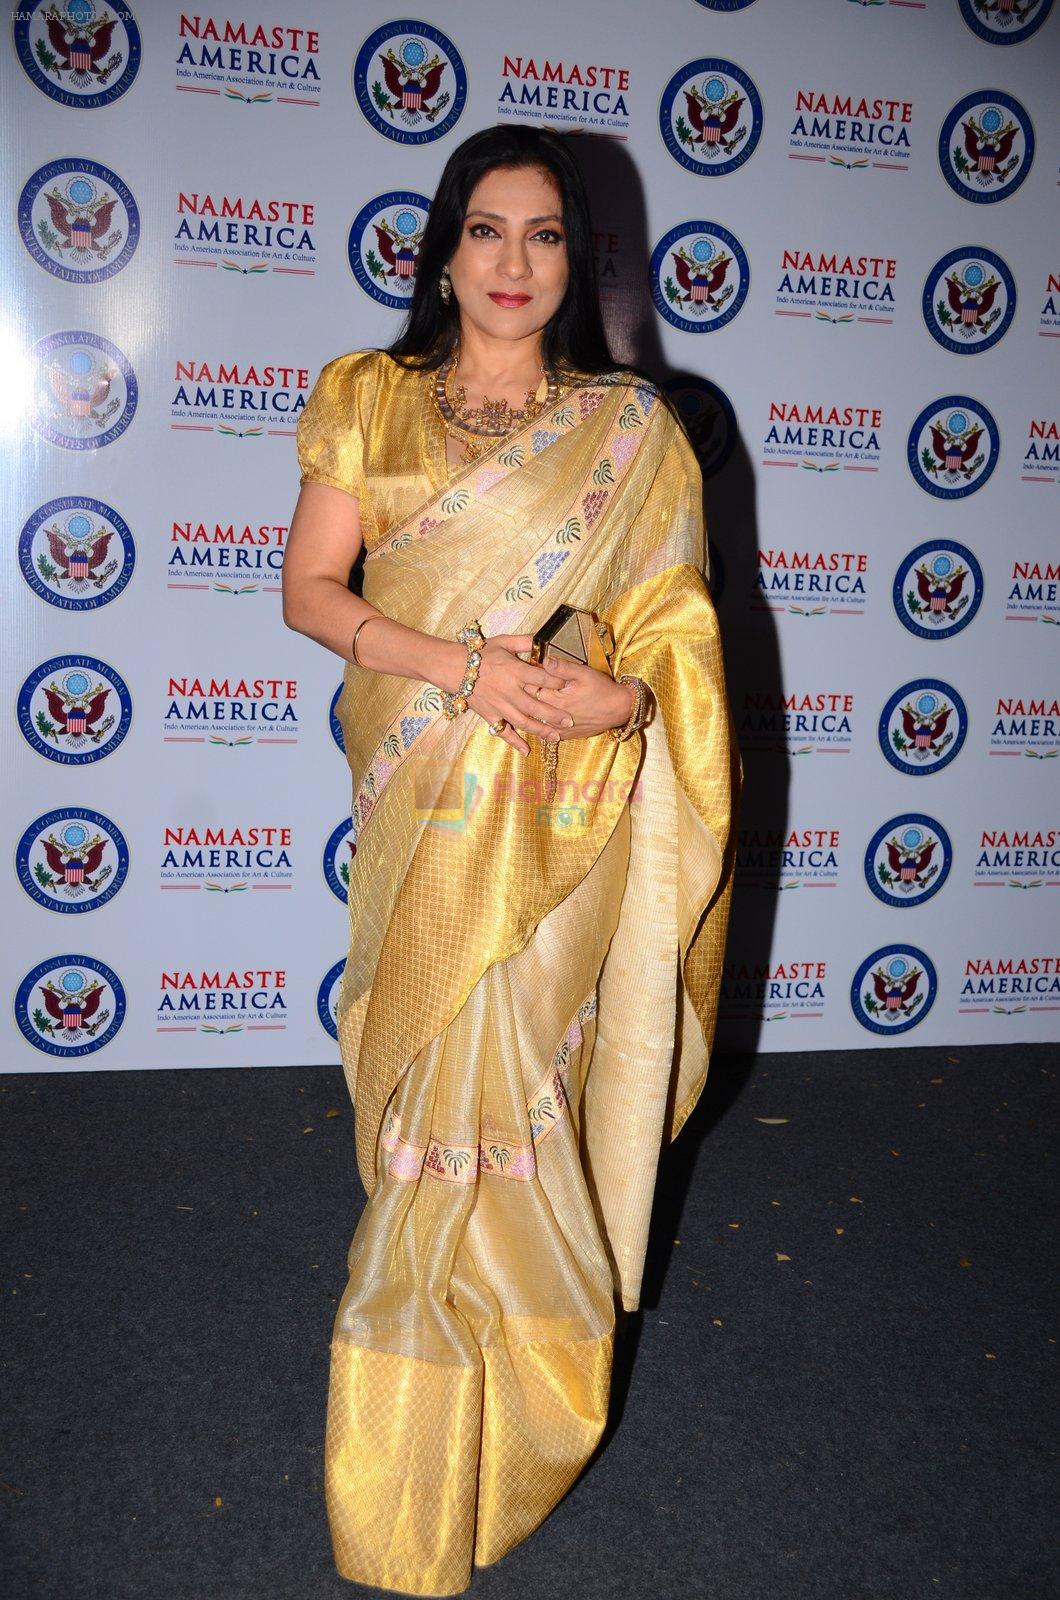 Aarti Surendranath at Namaste America for Donald Trump swearing ceremony on 20th Jan 2017